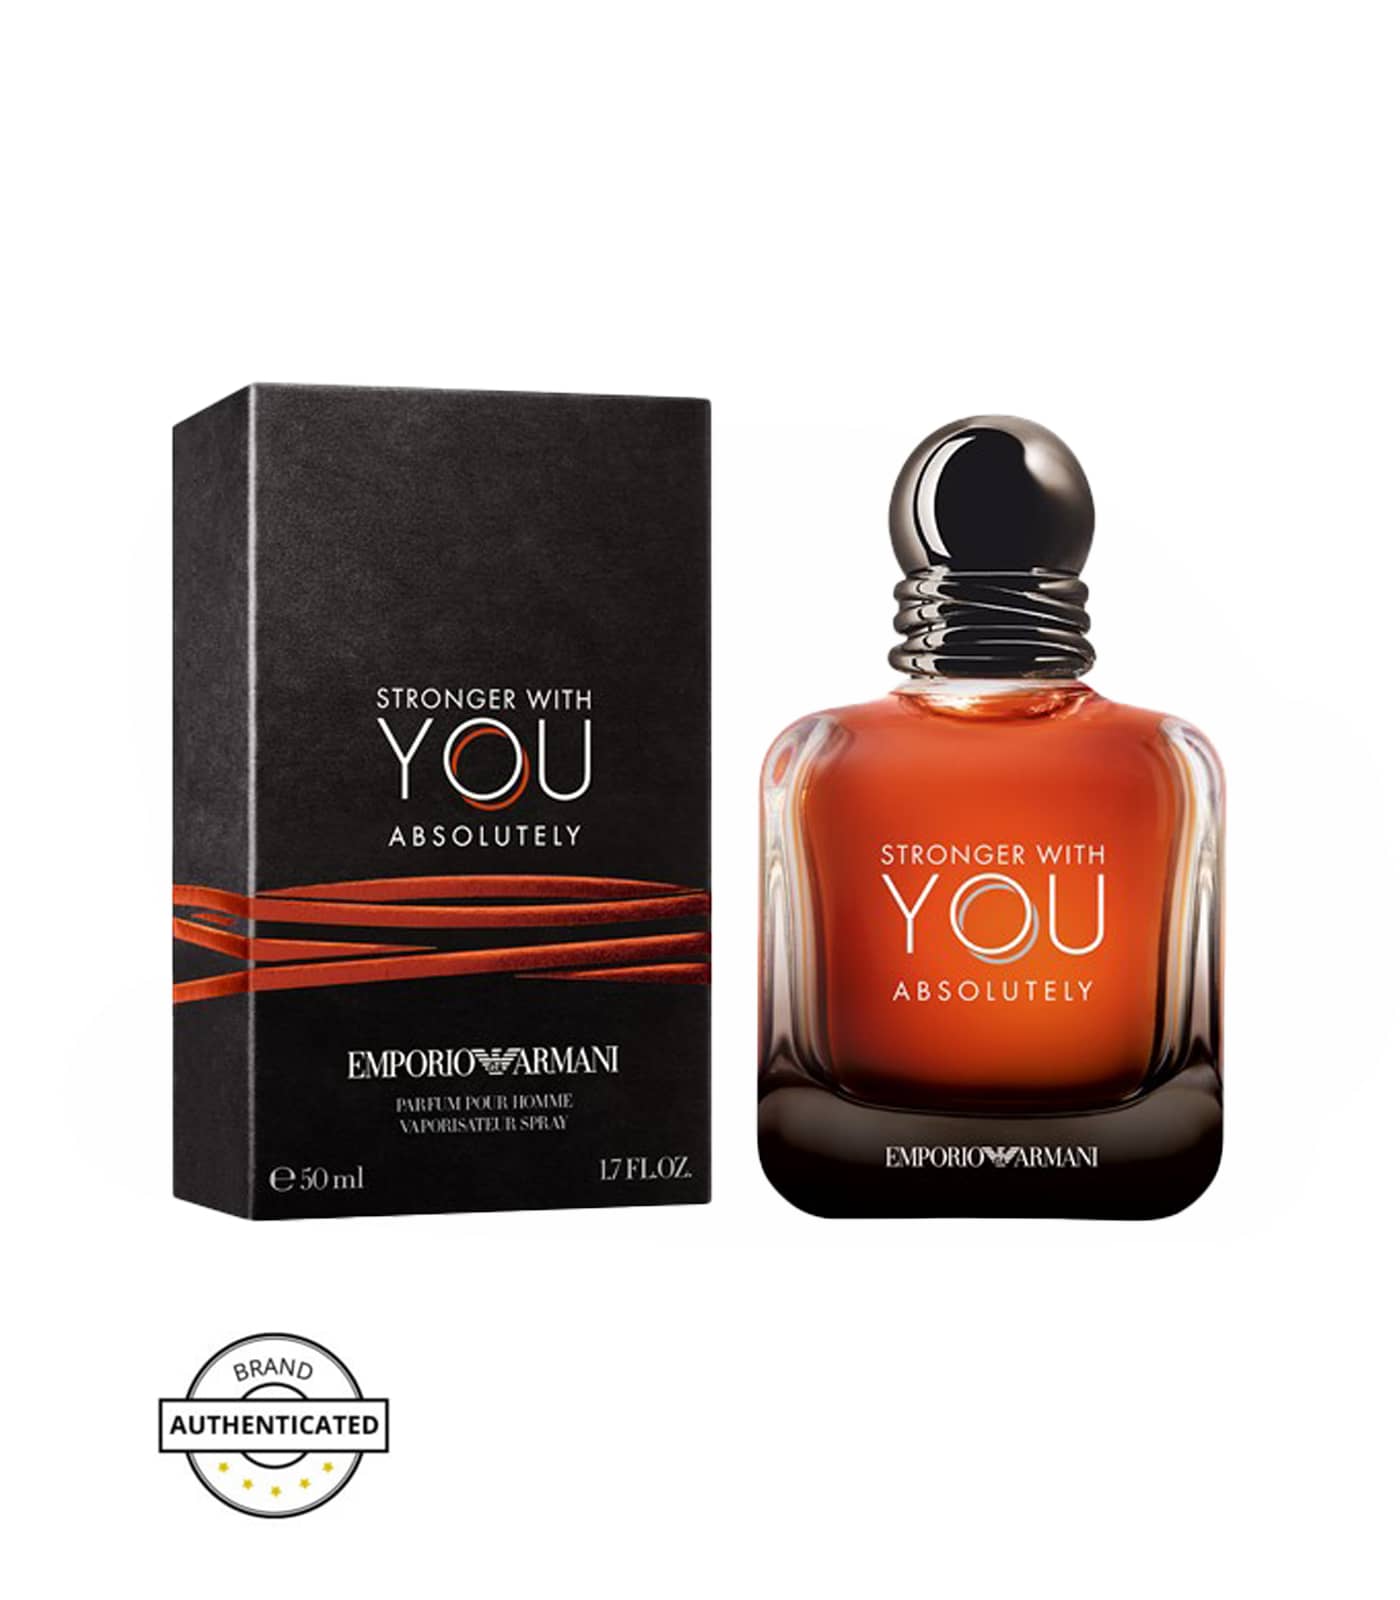 EMPORIO ARMANI  Stronger With You Absolutely - Allure Essence